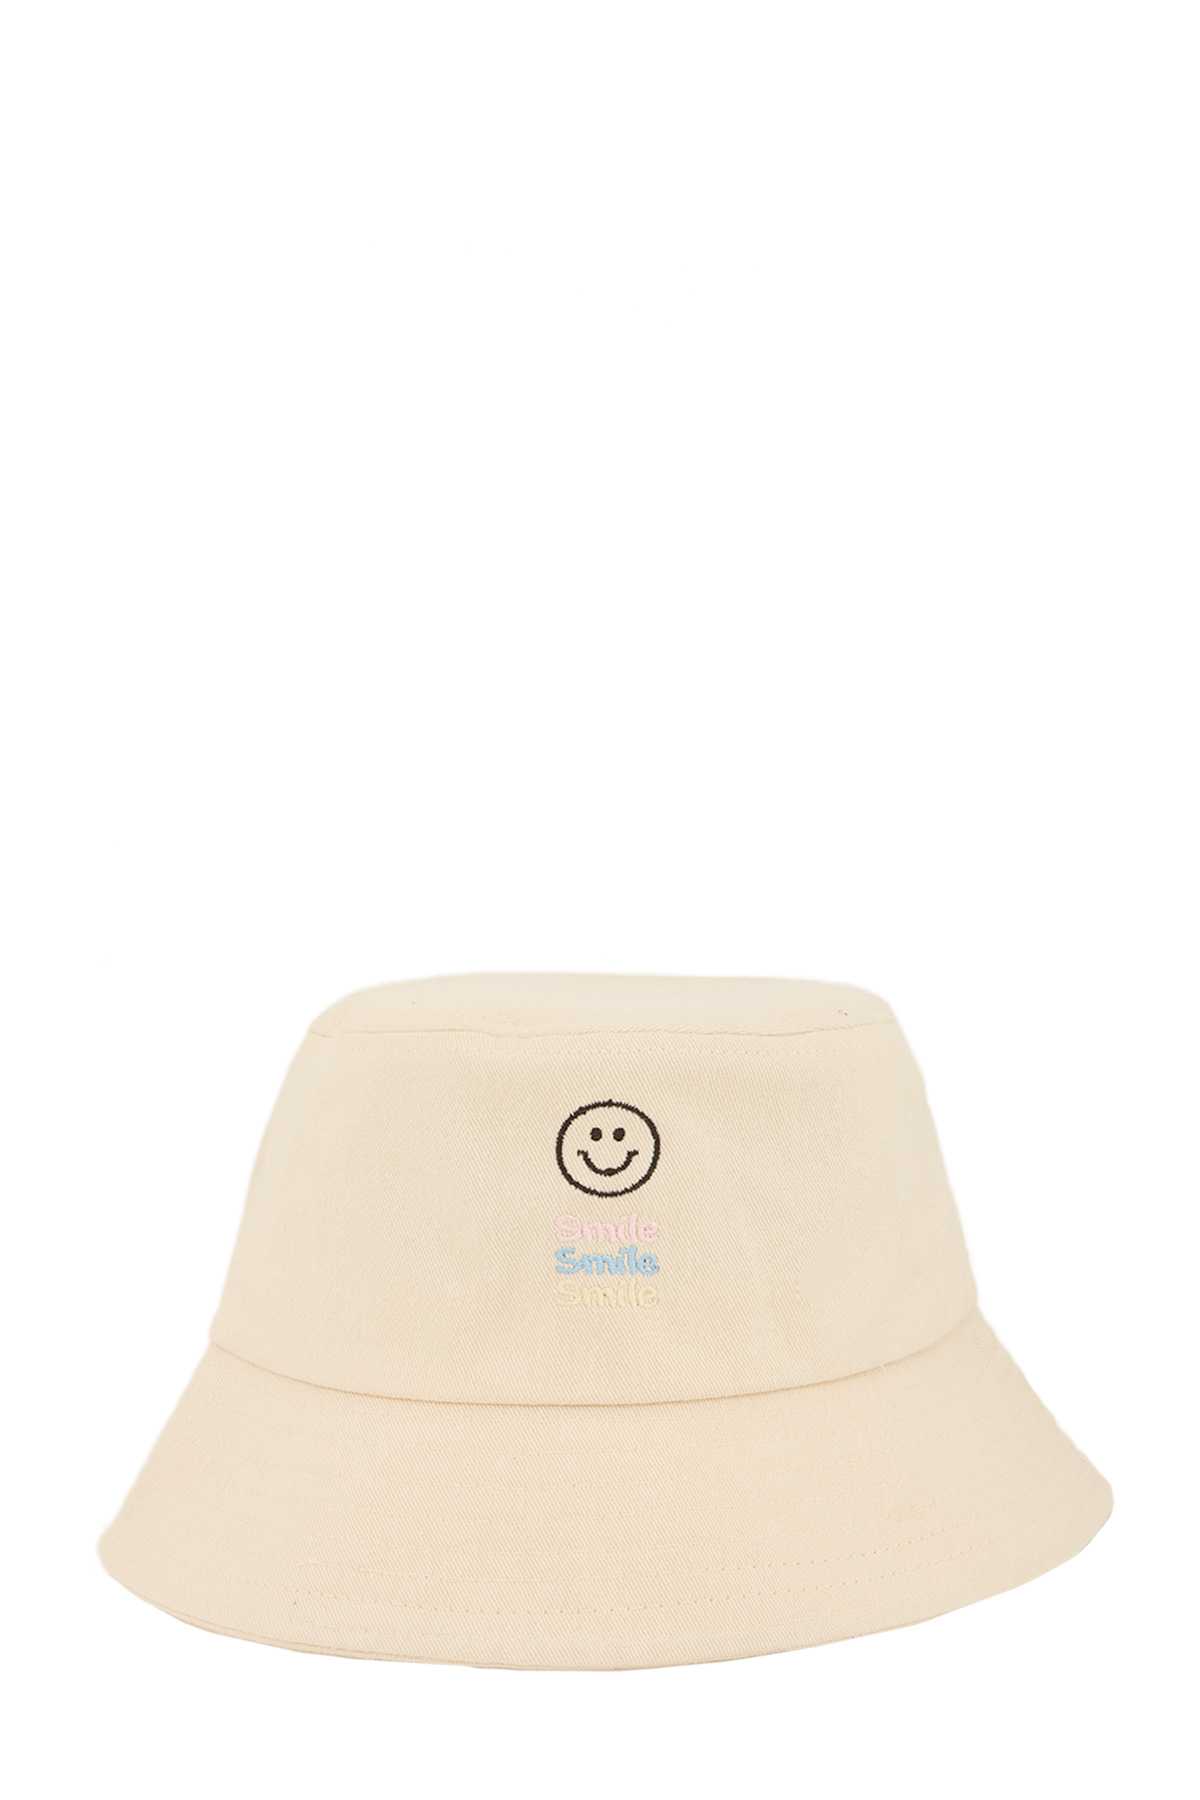 Simple Smiling Face Bucket Hat